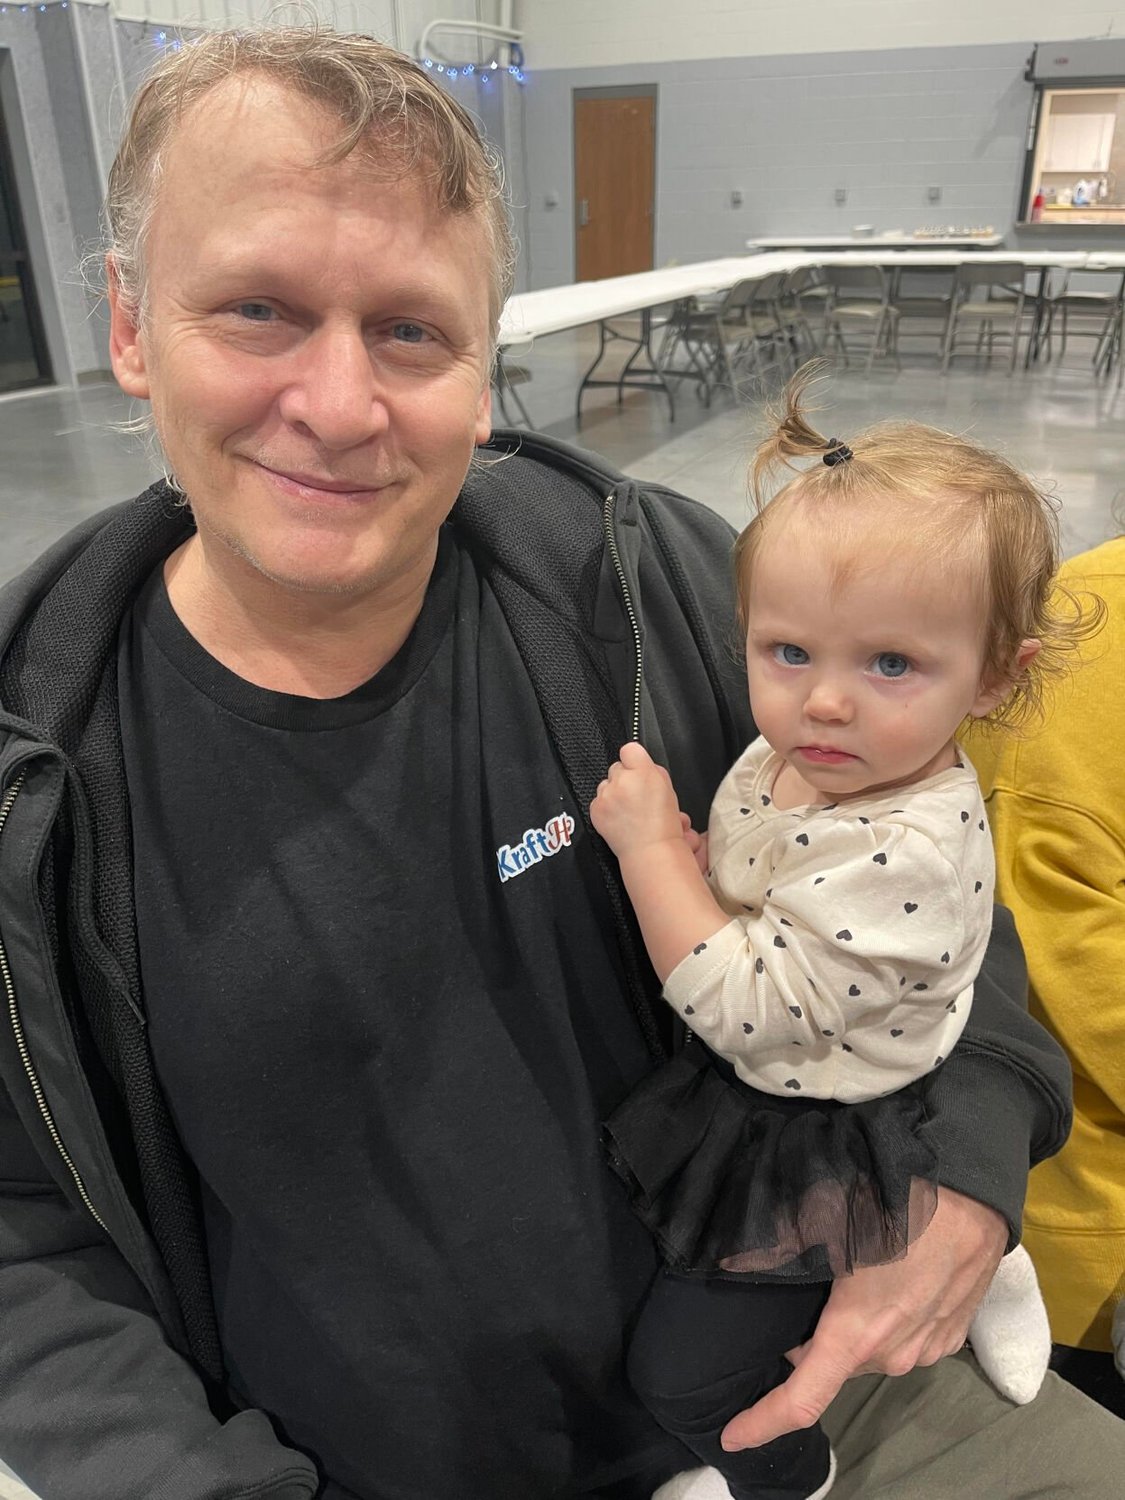 Shane Hoyt was brought to drug court for meth but has put in the time and effort to change his life and now is looking forward to raising his baby girl Ivy who is one year old.